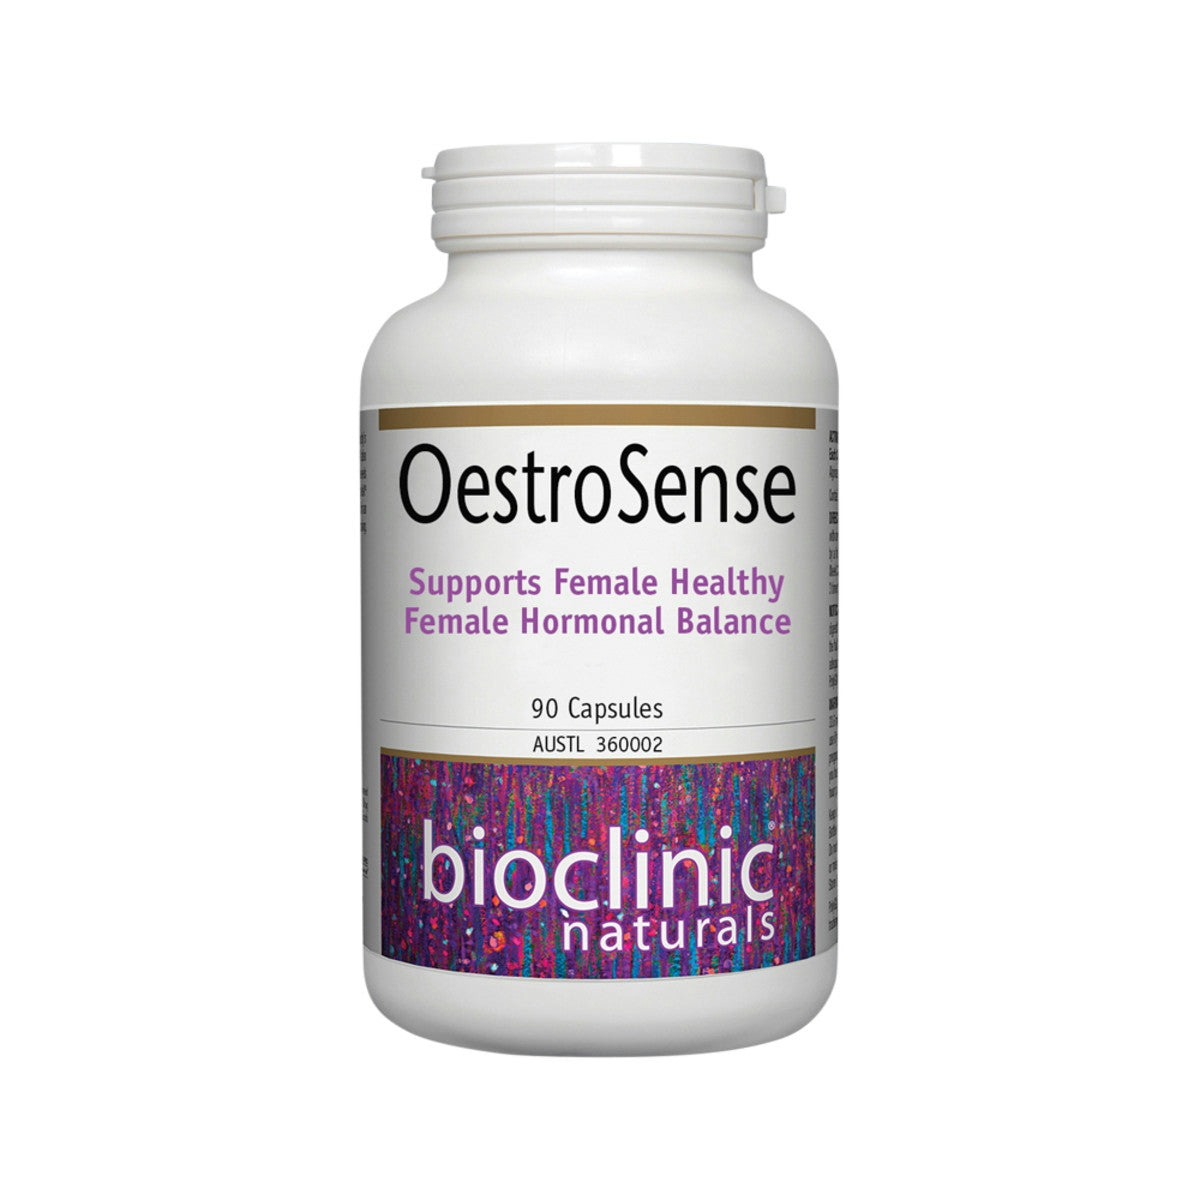 image of Bioclinic Naturals OestroSense 90c with a white background